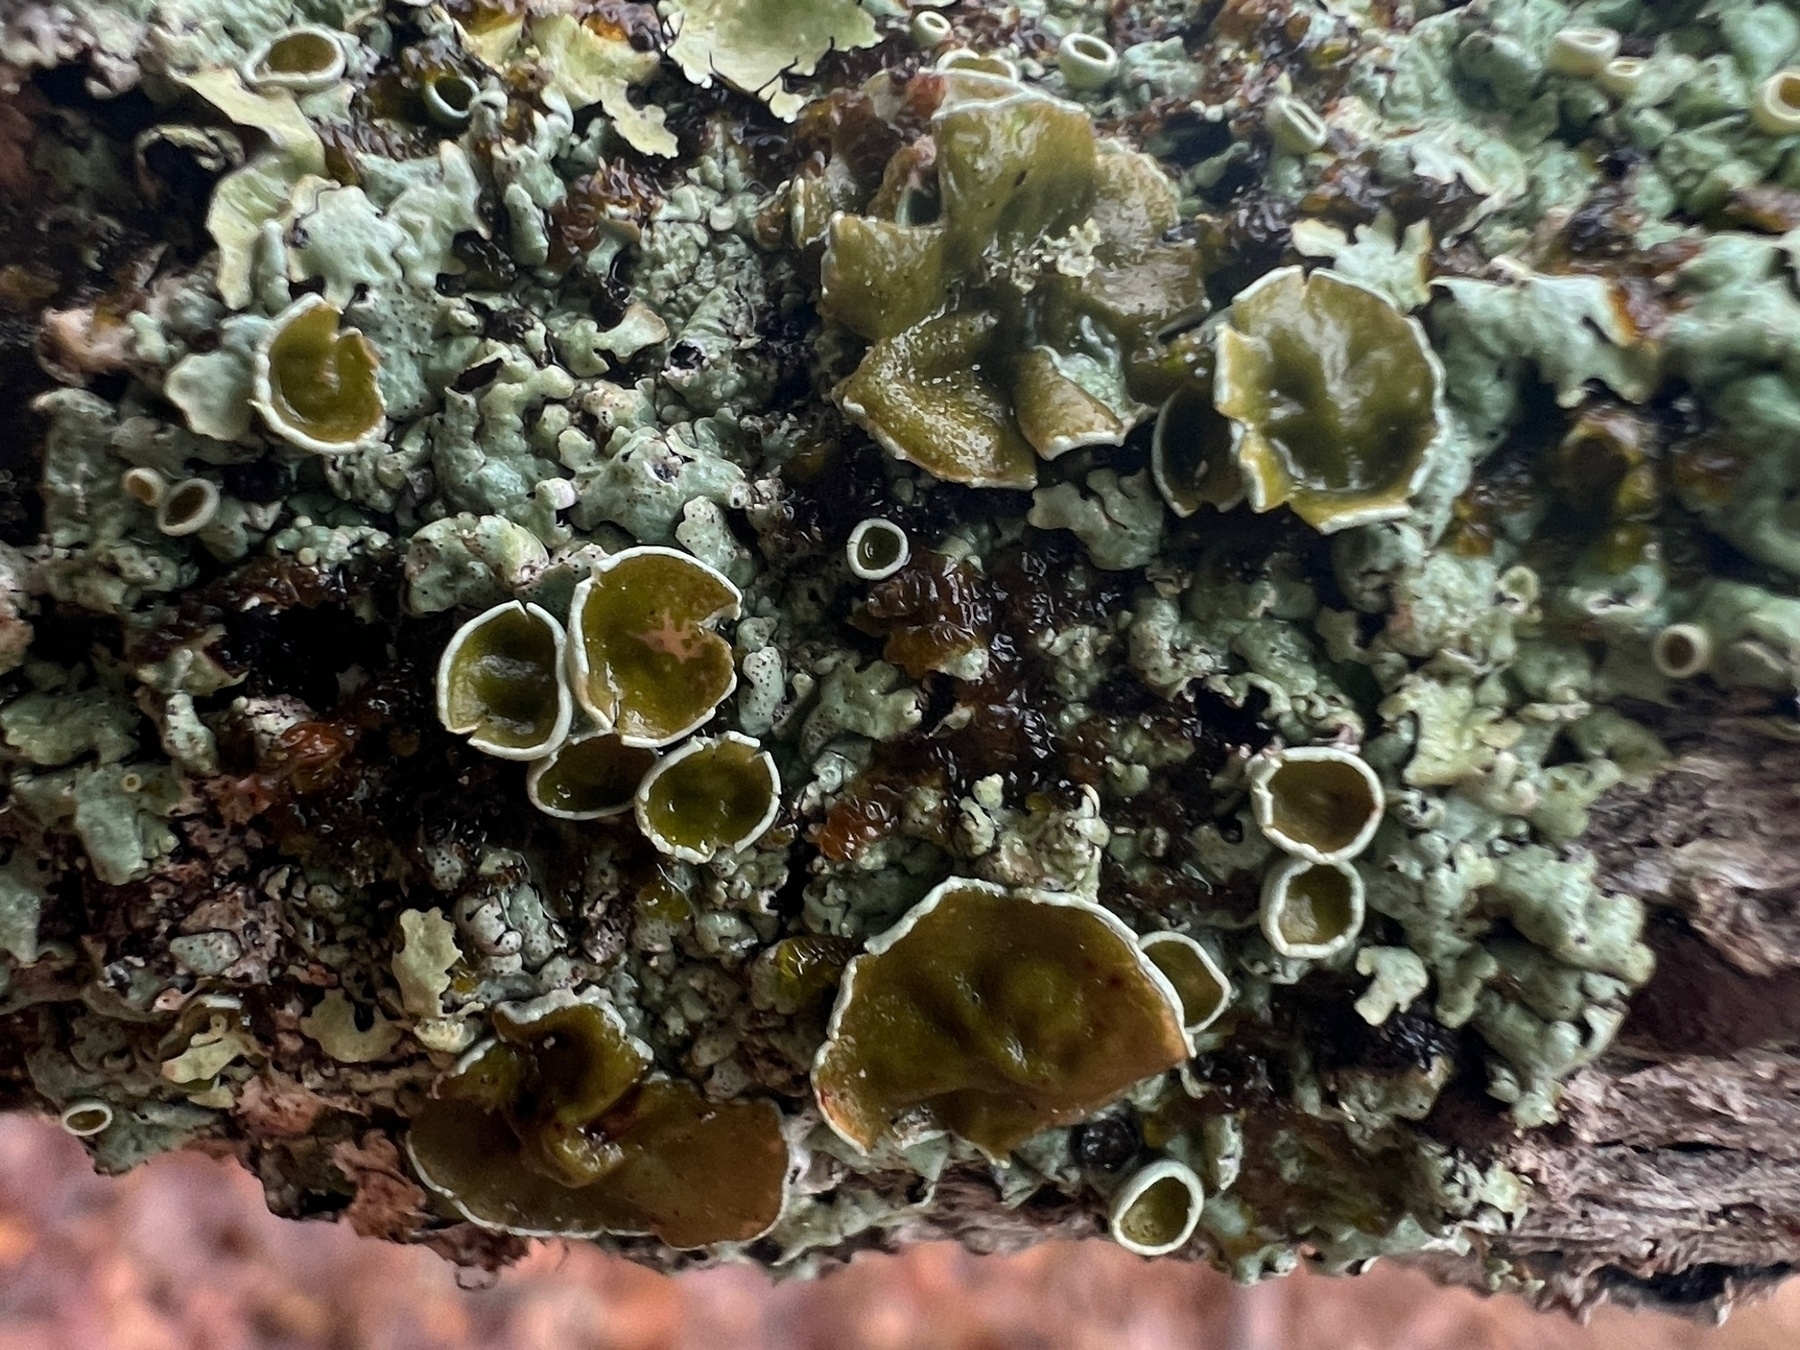 Various lichens growing on a branch, some are pale green and flat, others are dark green and cup shapped with a white outer rim